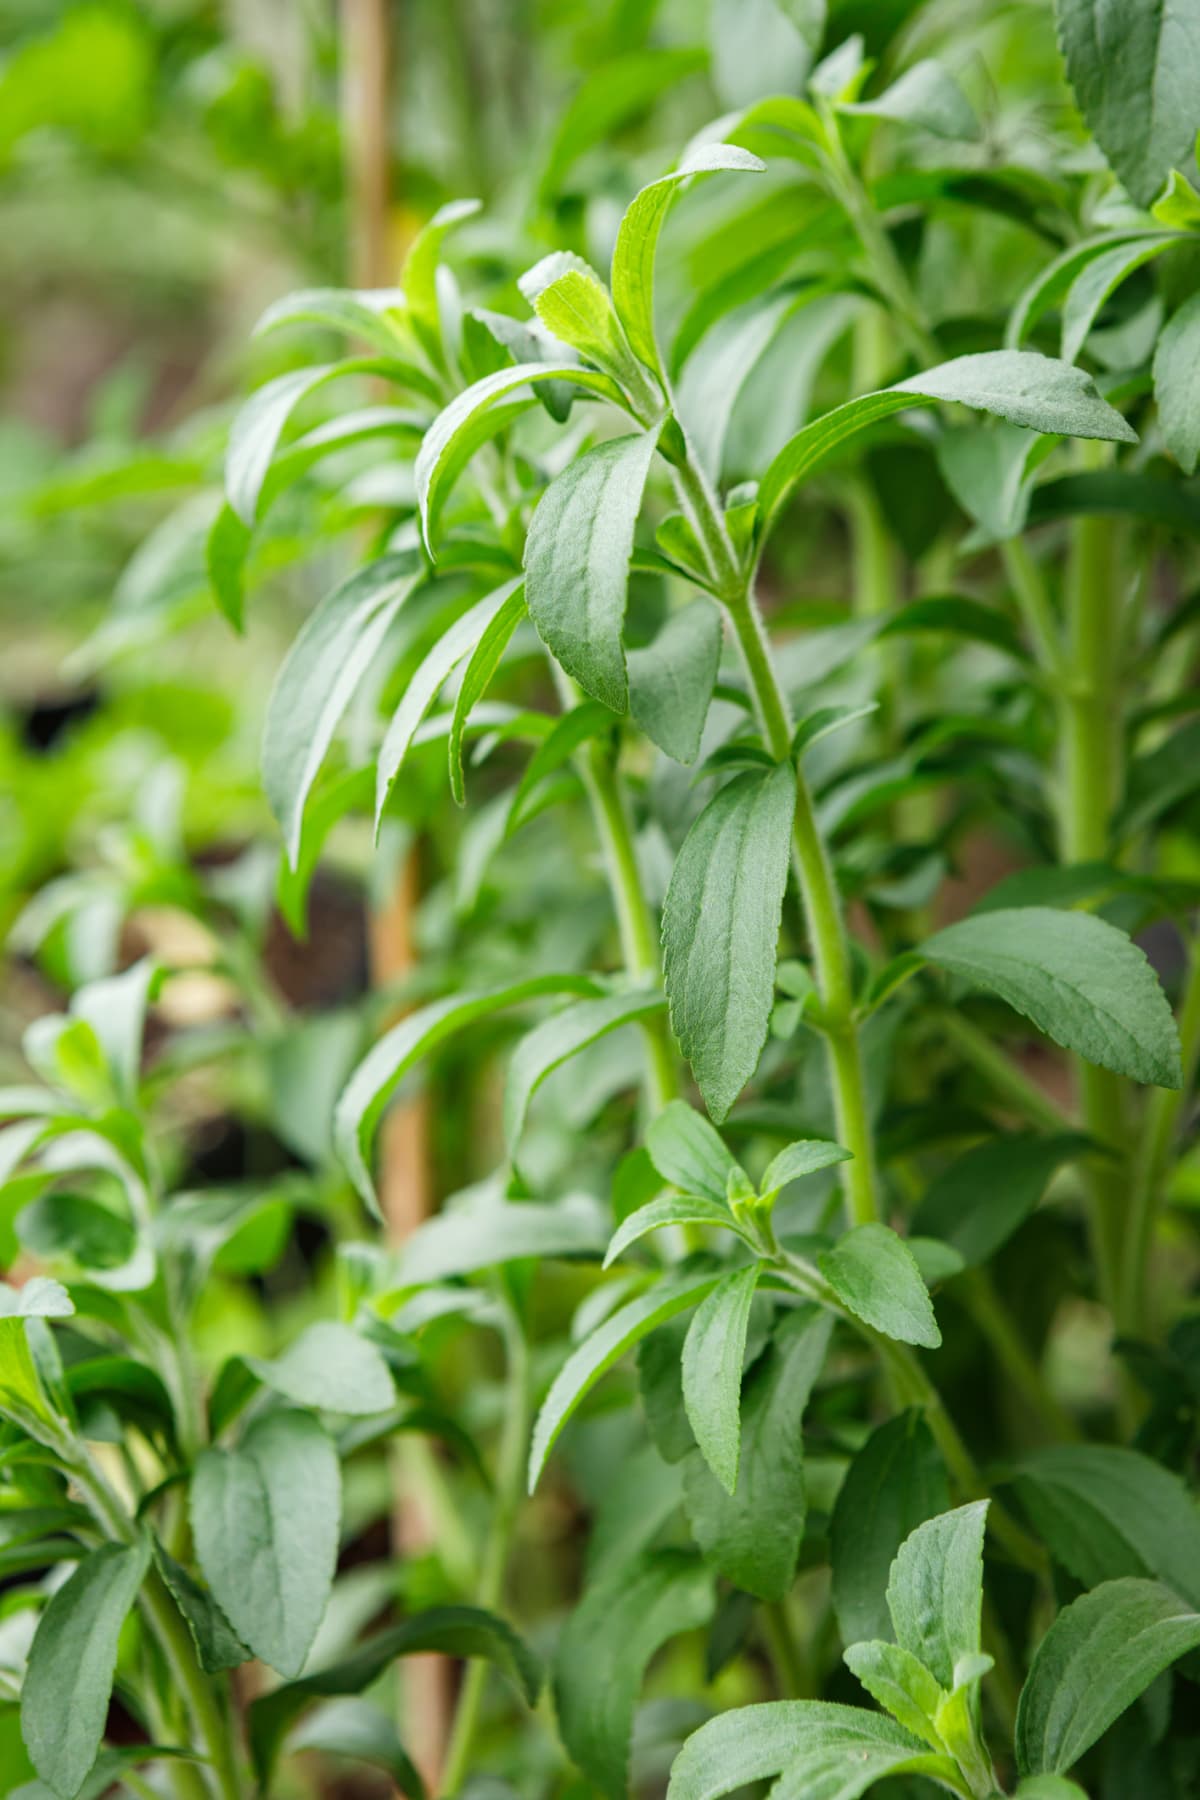 Stevia plants growing outdoors